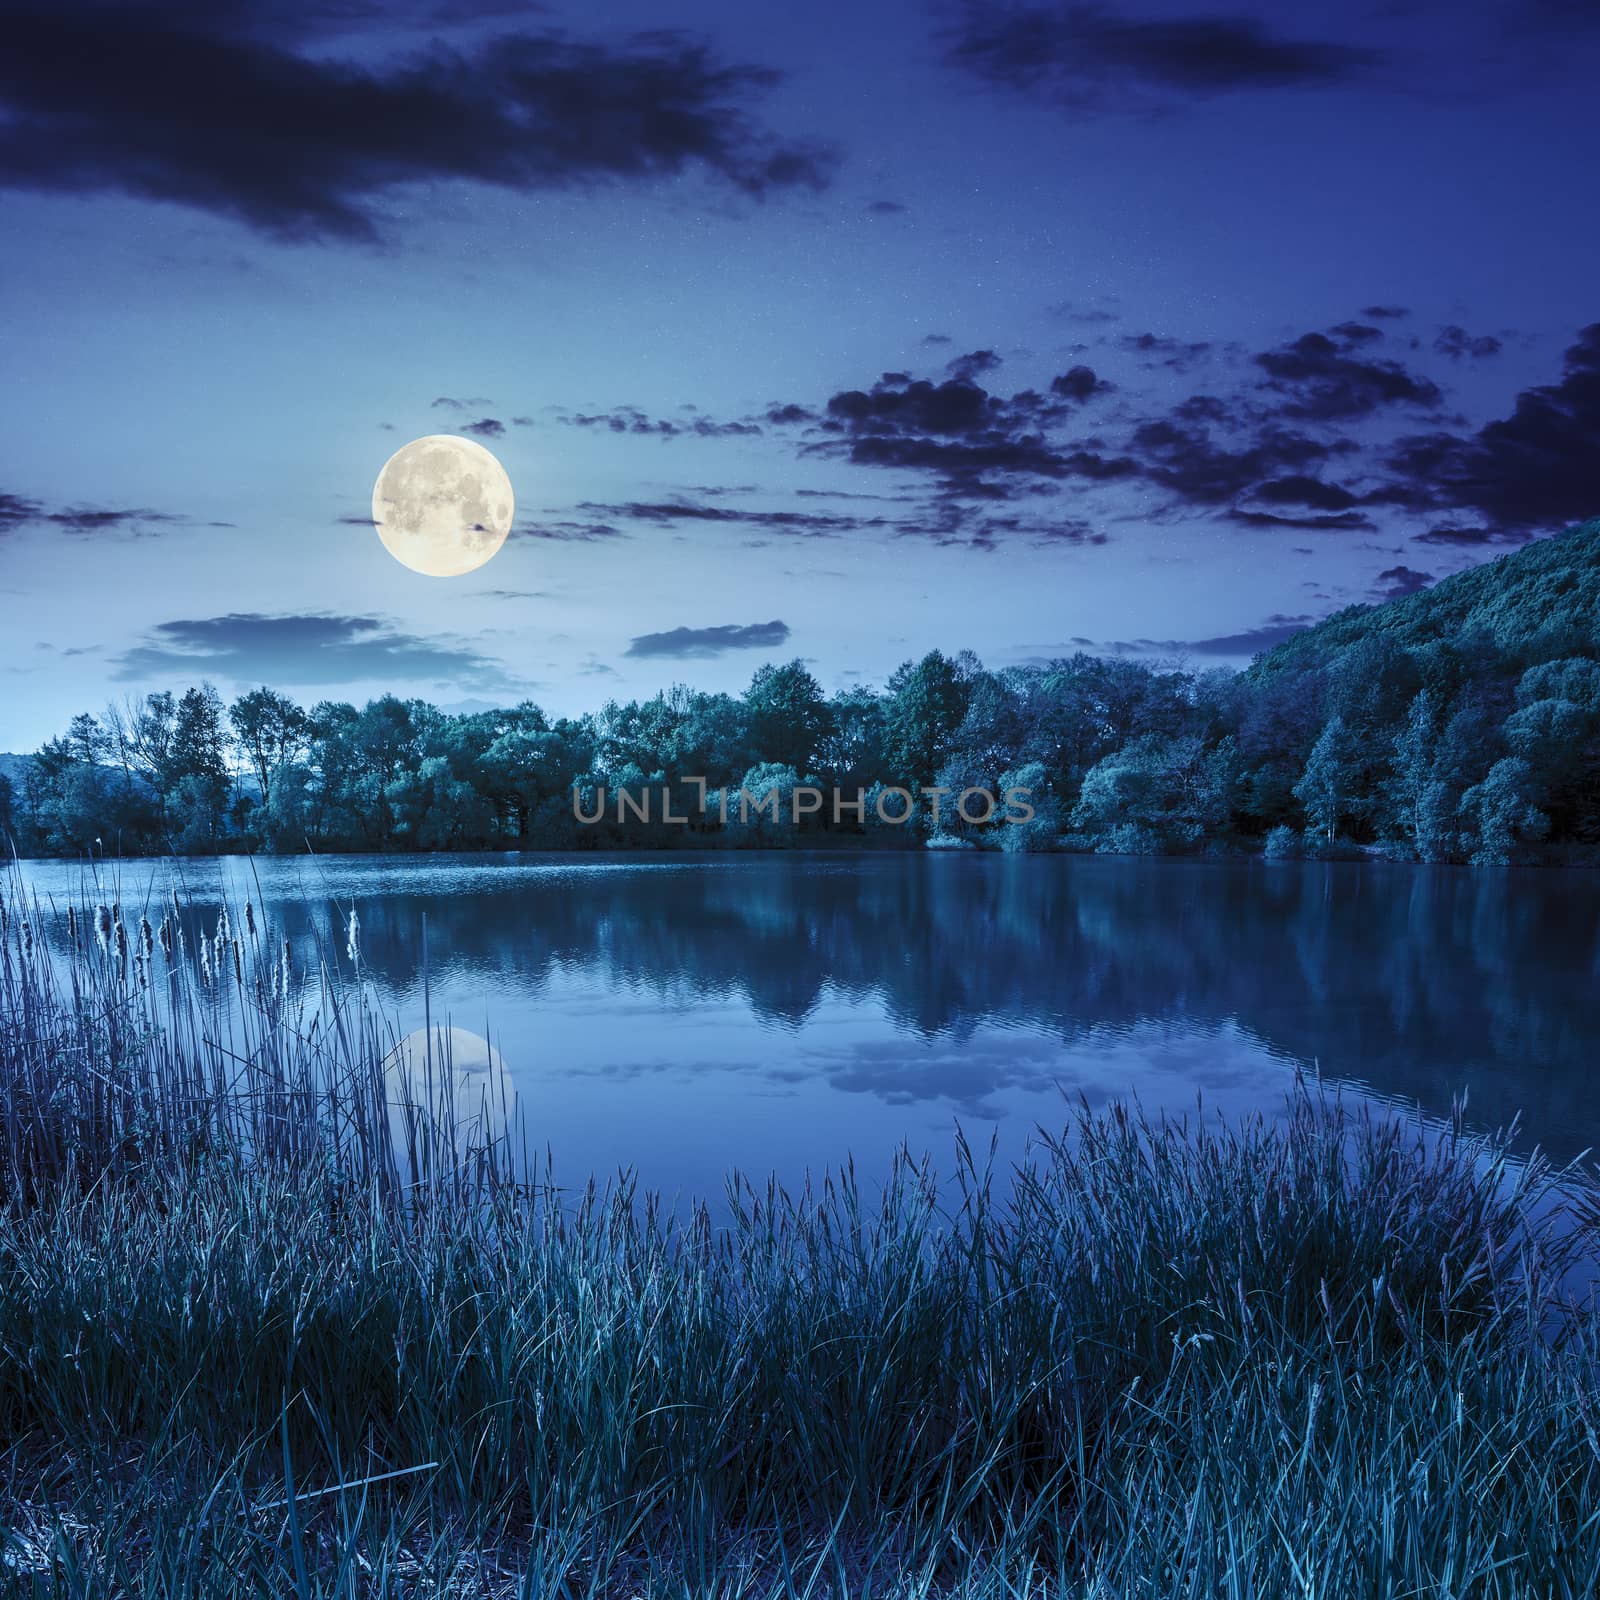 view on lake near the forest on mountain background at night in full moon light